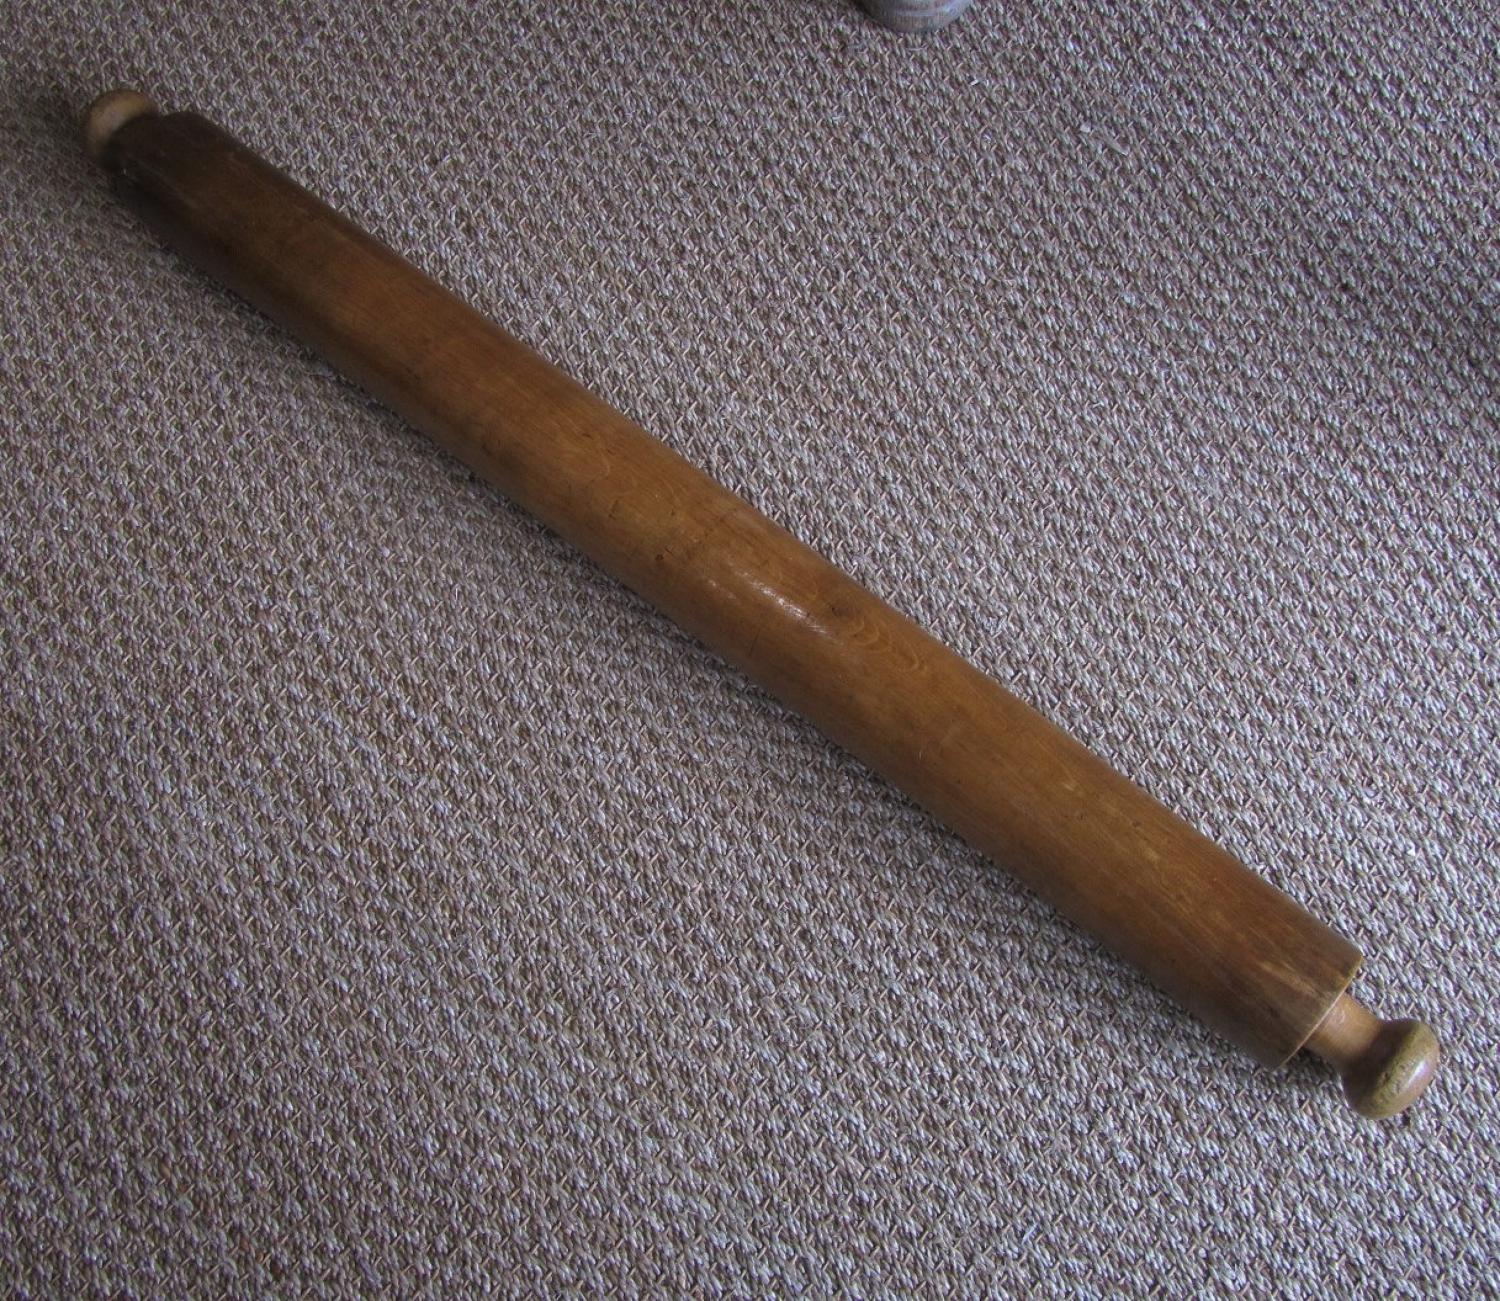 A Huge industrial rolling pin